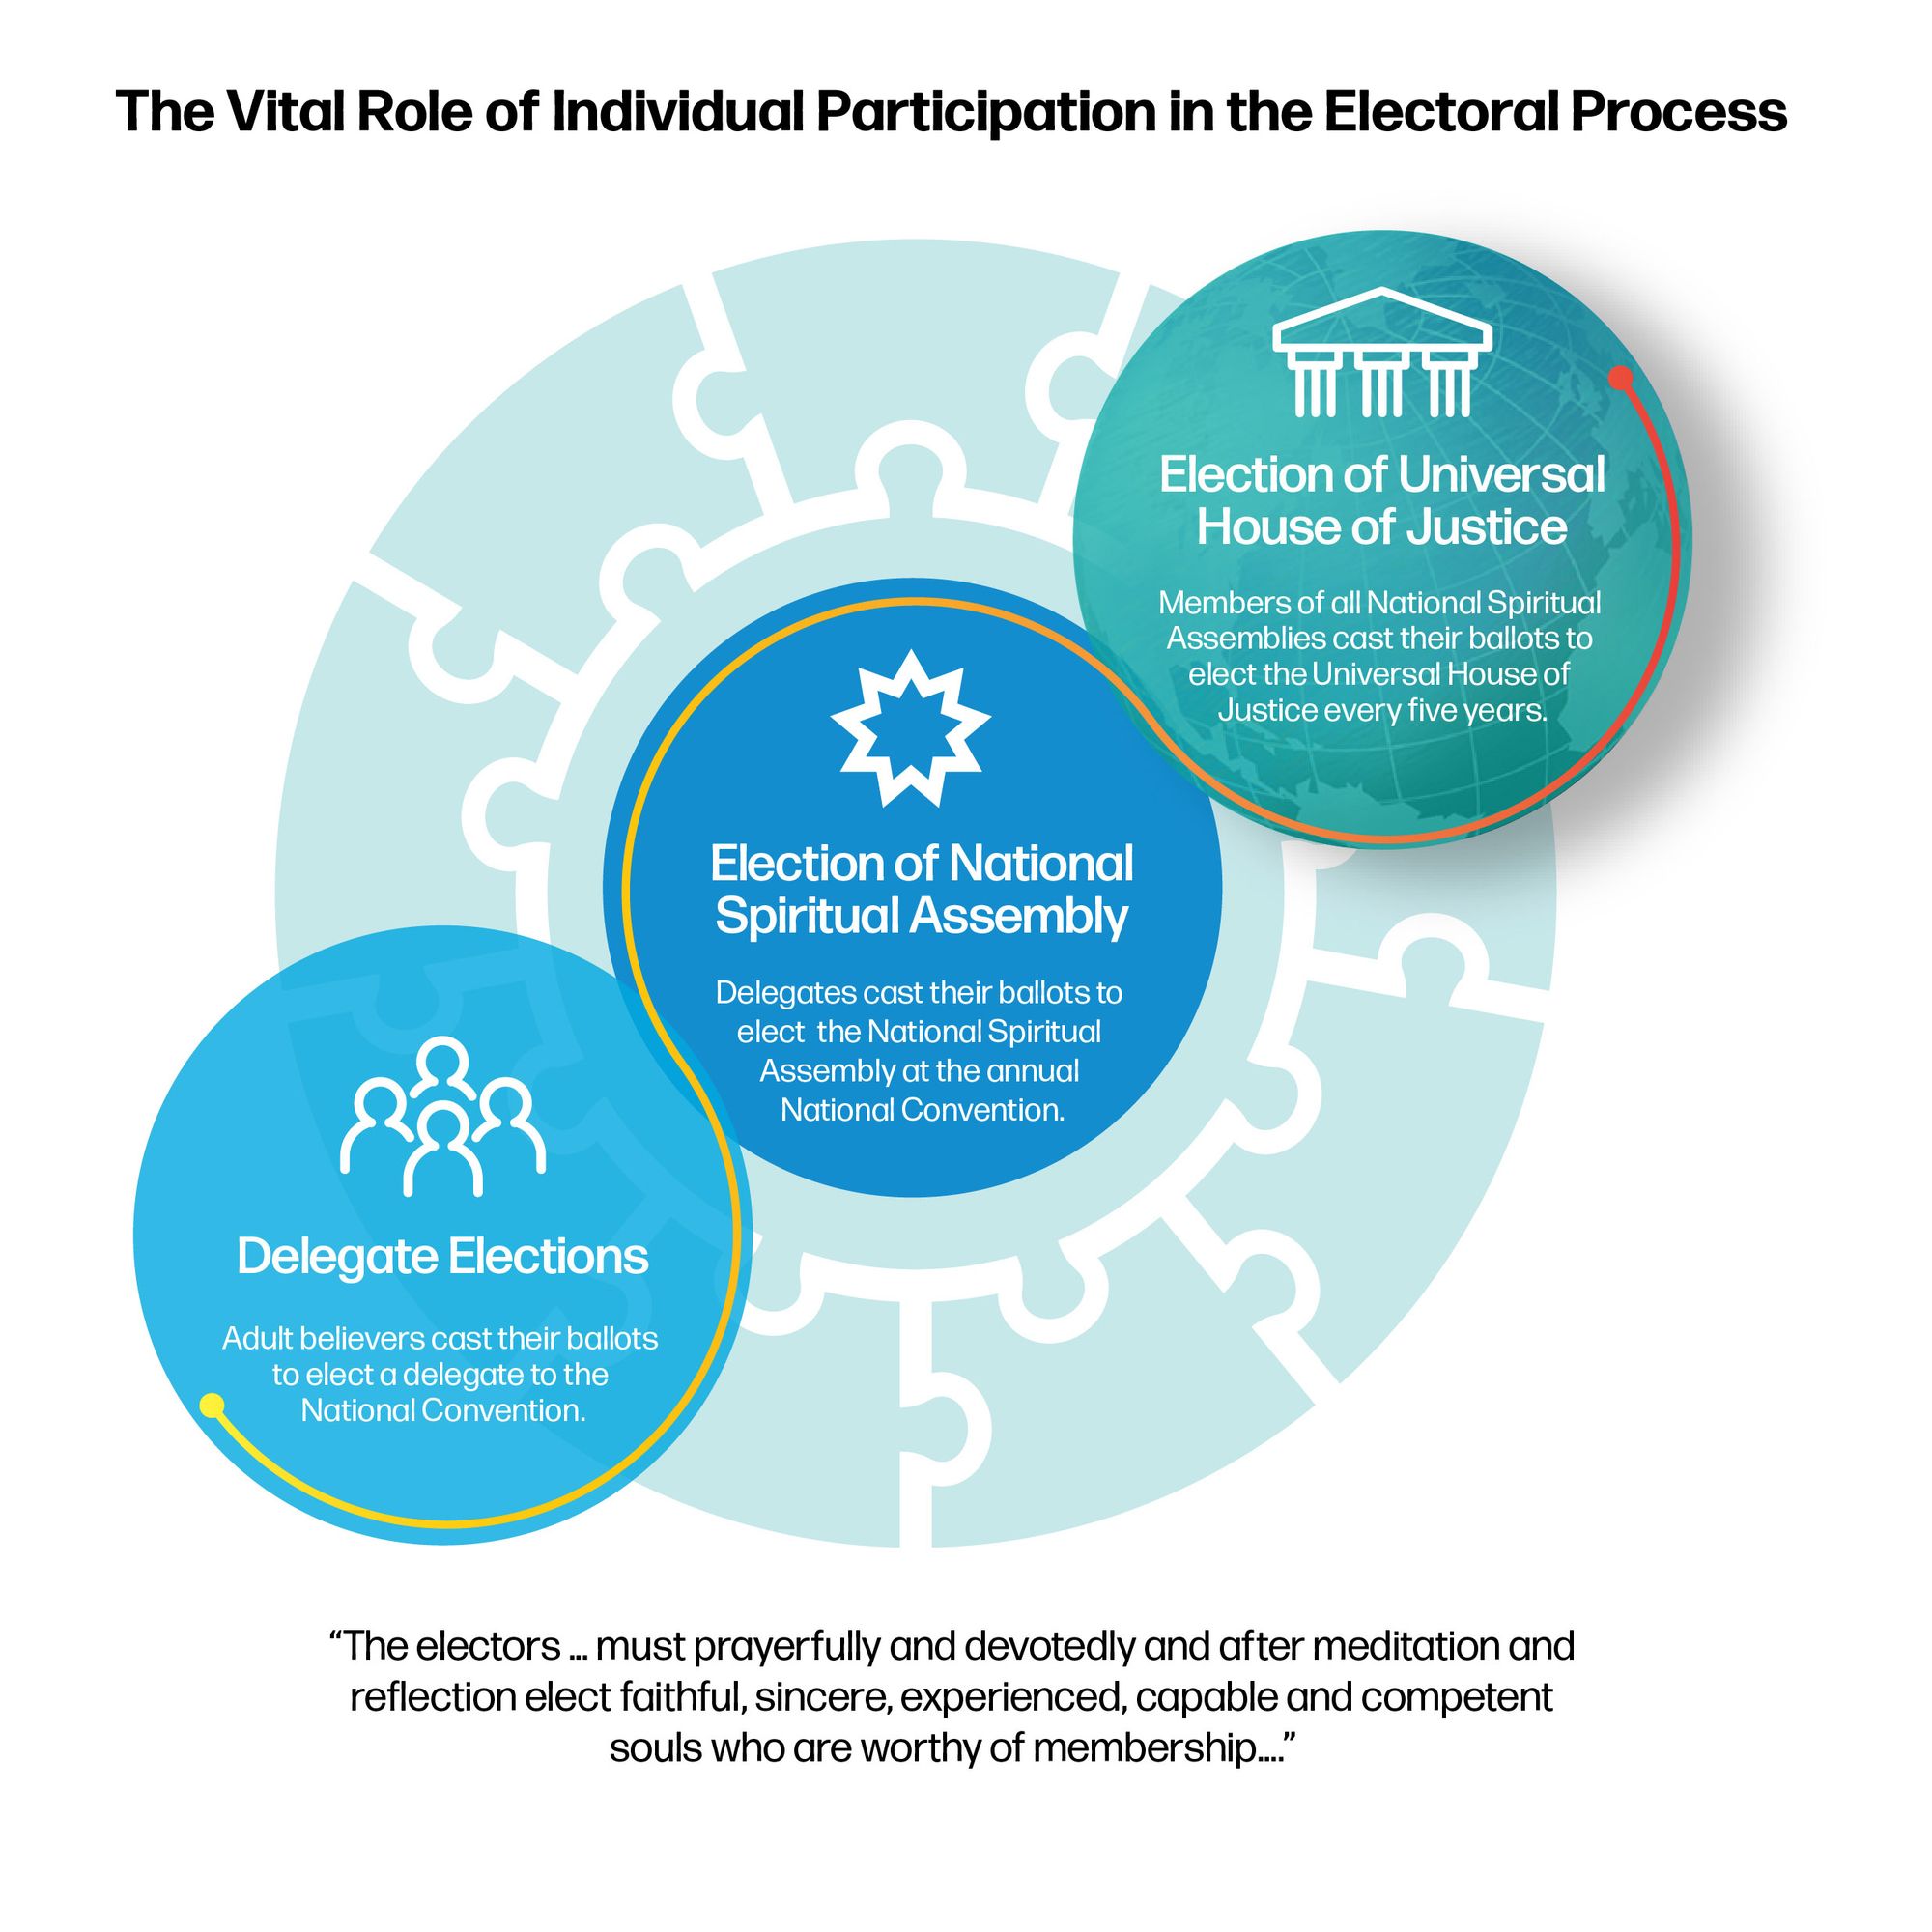 Diagram of the vital role of individual participation in the electoral process: from delegate elections to election of the National Spiritual Assembly to the election of the Universal House of Justice